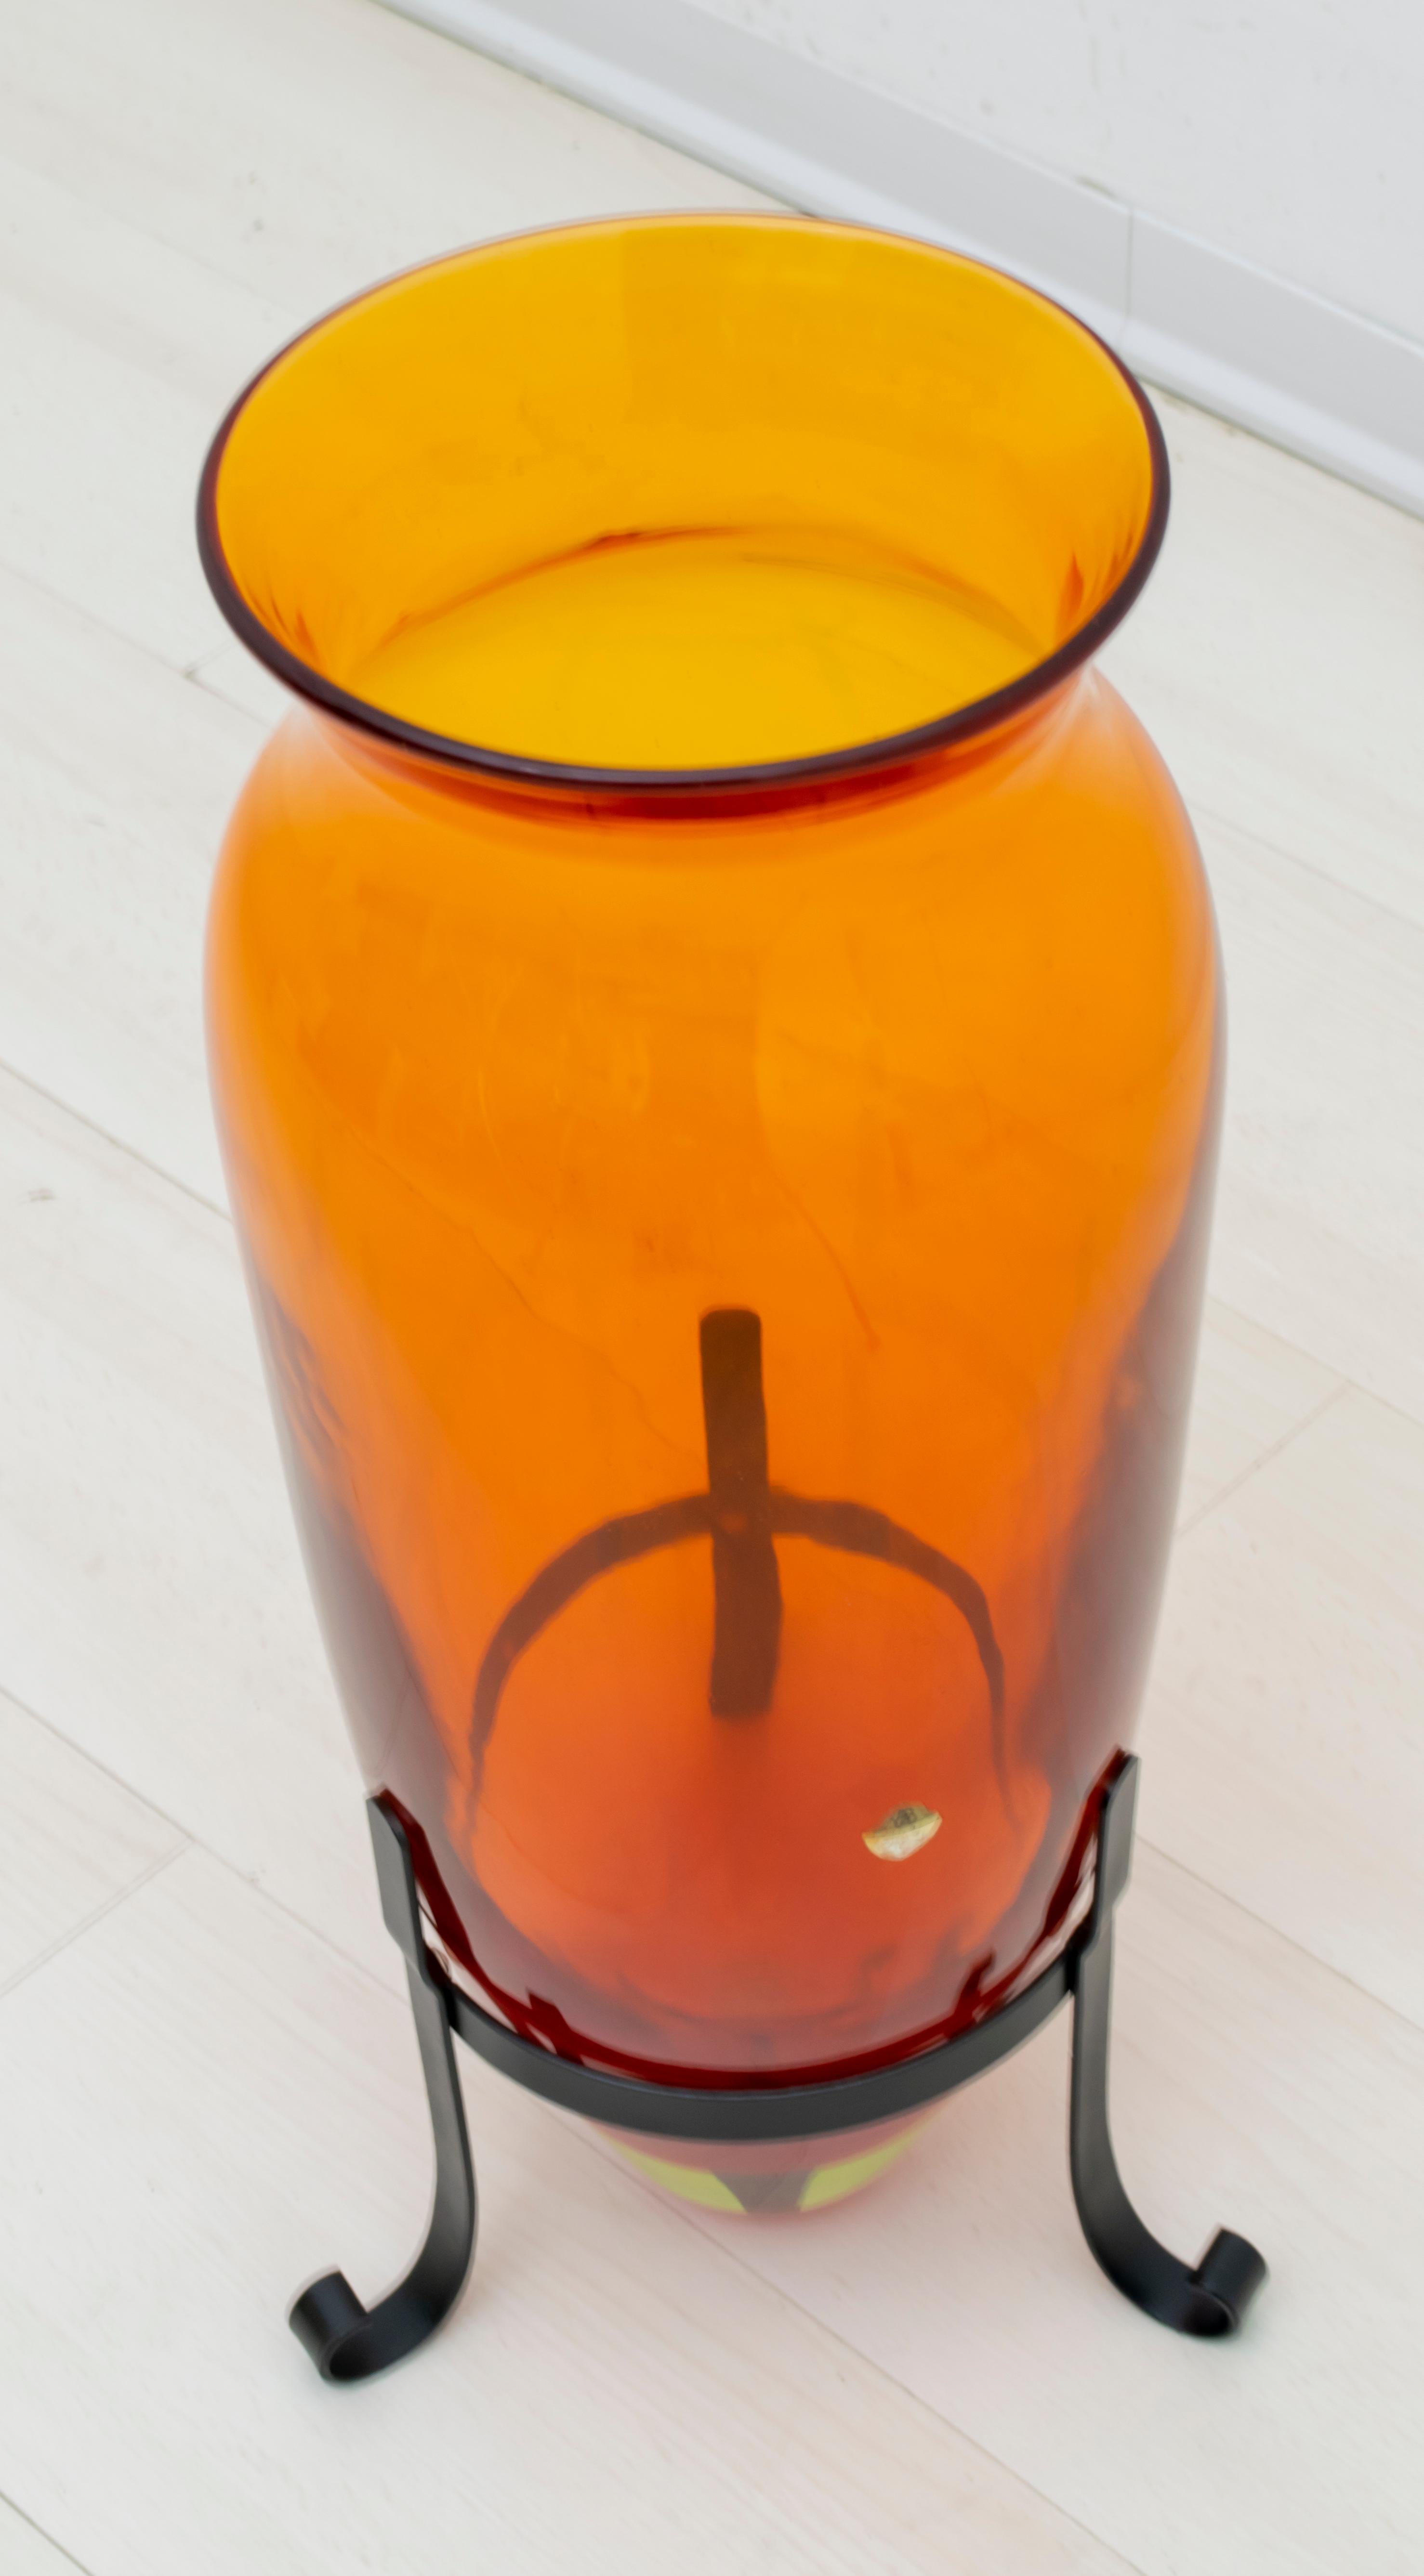 Large floor vase produced by the famous Archimede Seguso glassware, original sticker with Seguso Vetri d'Arte Murano key, production number 13742.

Archimede Seguso was one of the most famous Venetian glassmakers, distinguishing itself in the